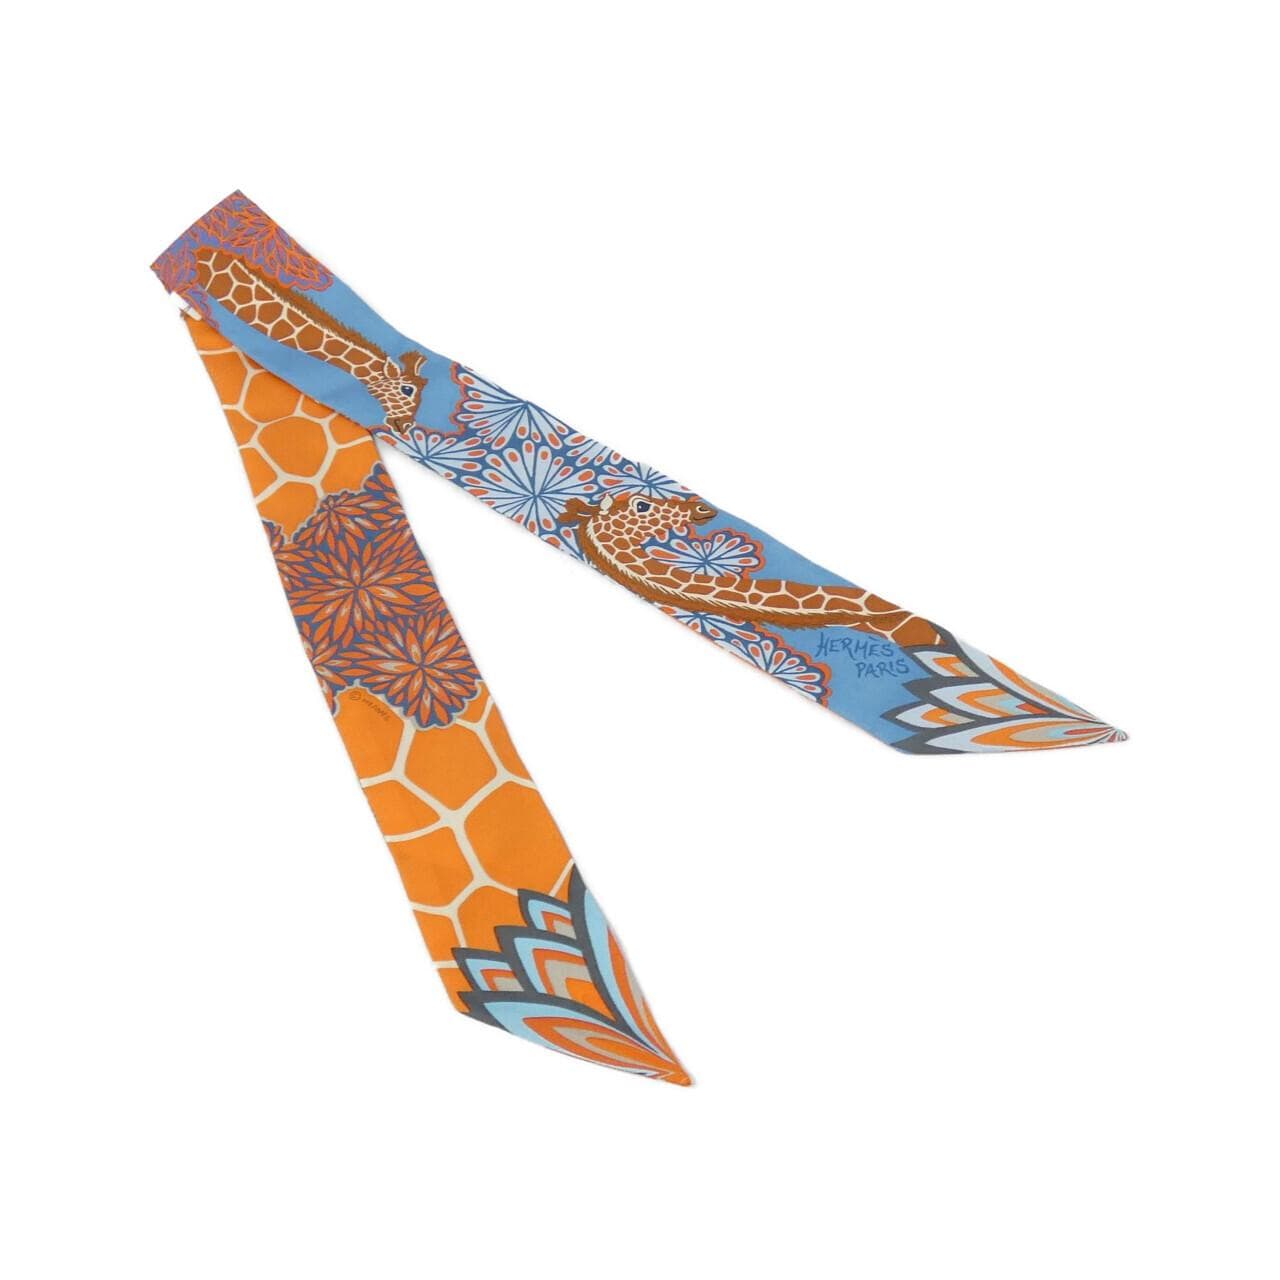 HERMES THE THREE GRACES Twilly 063441S Scarf